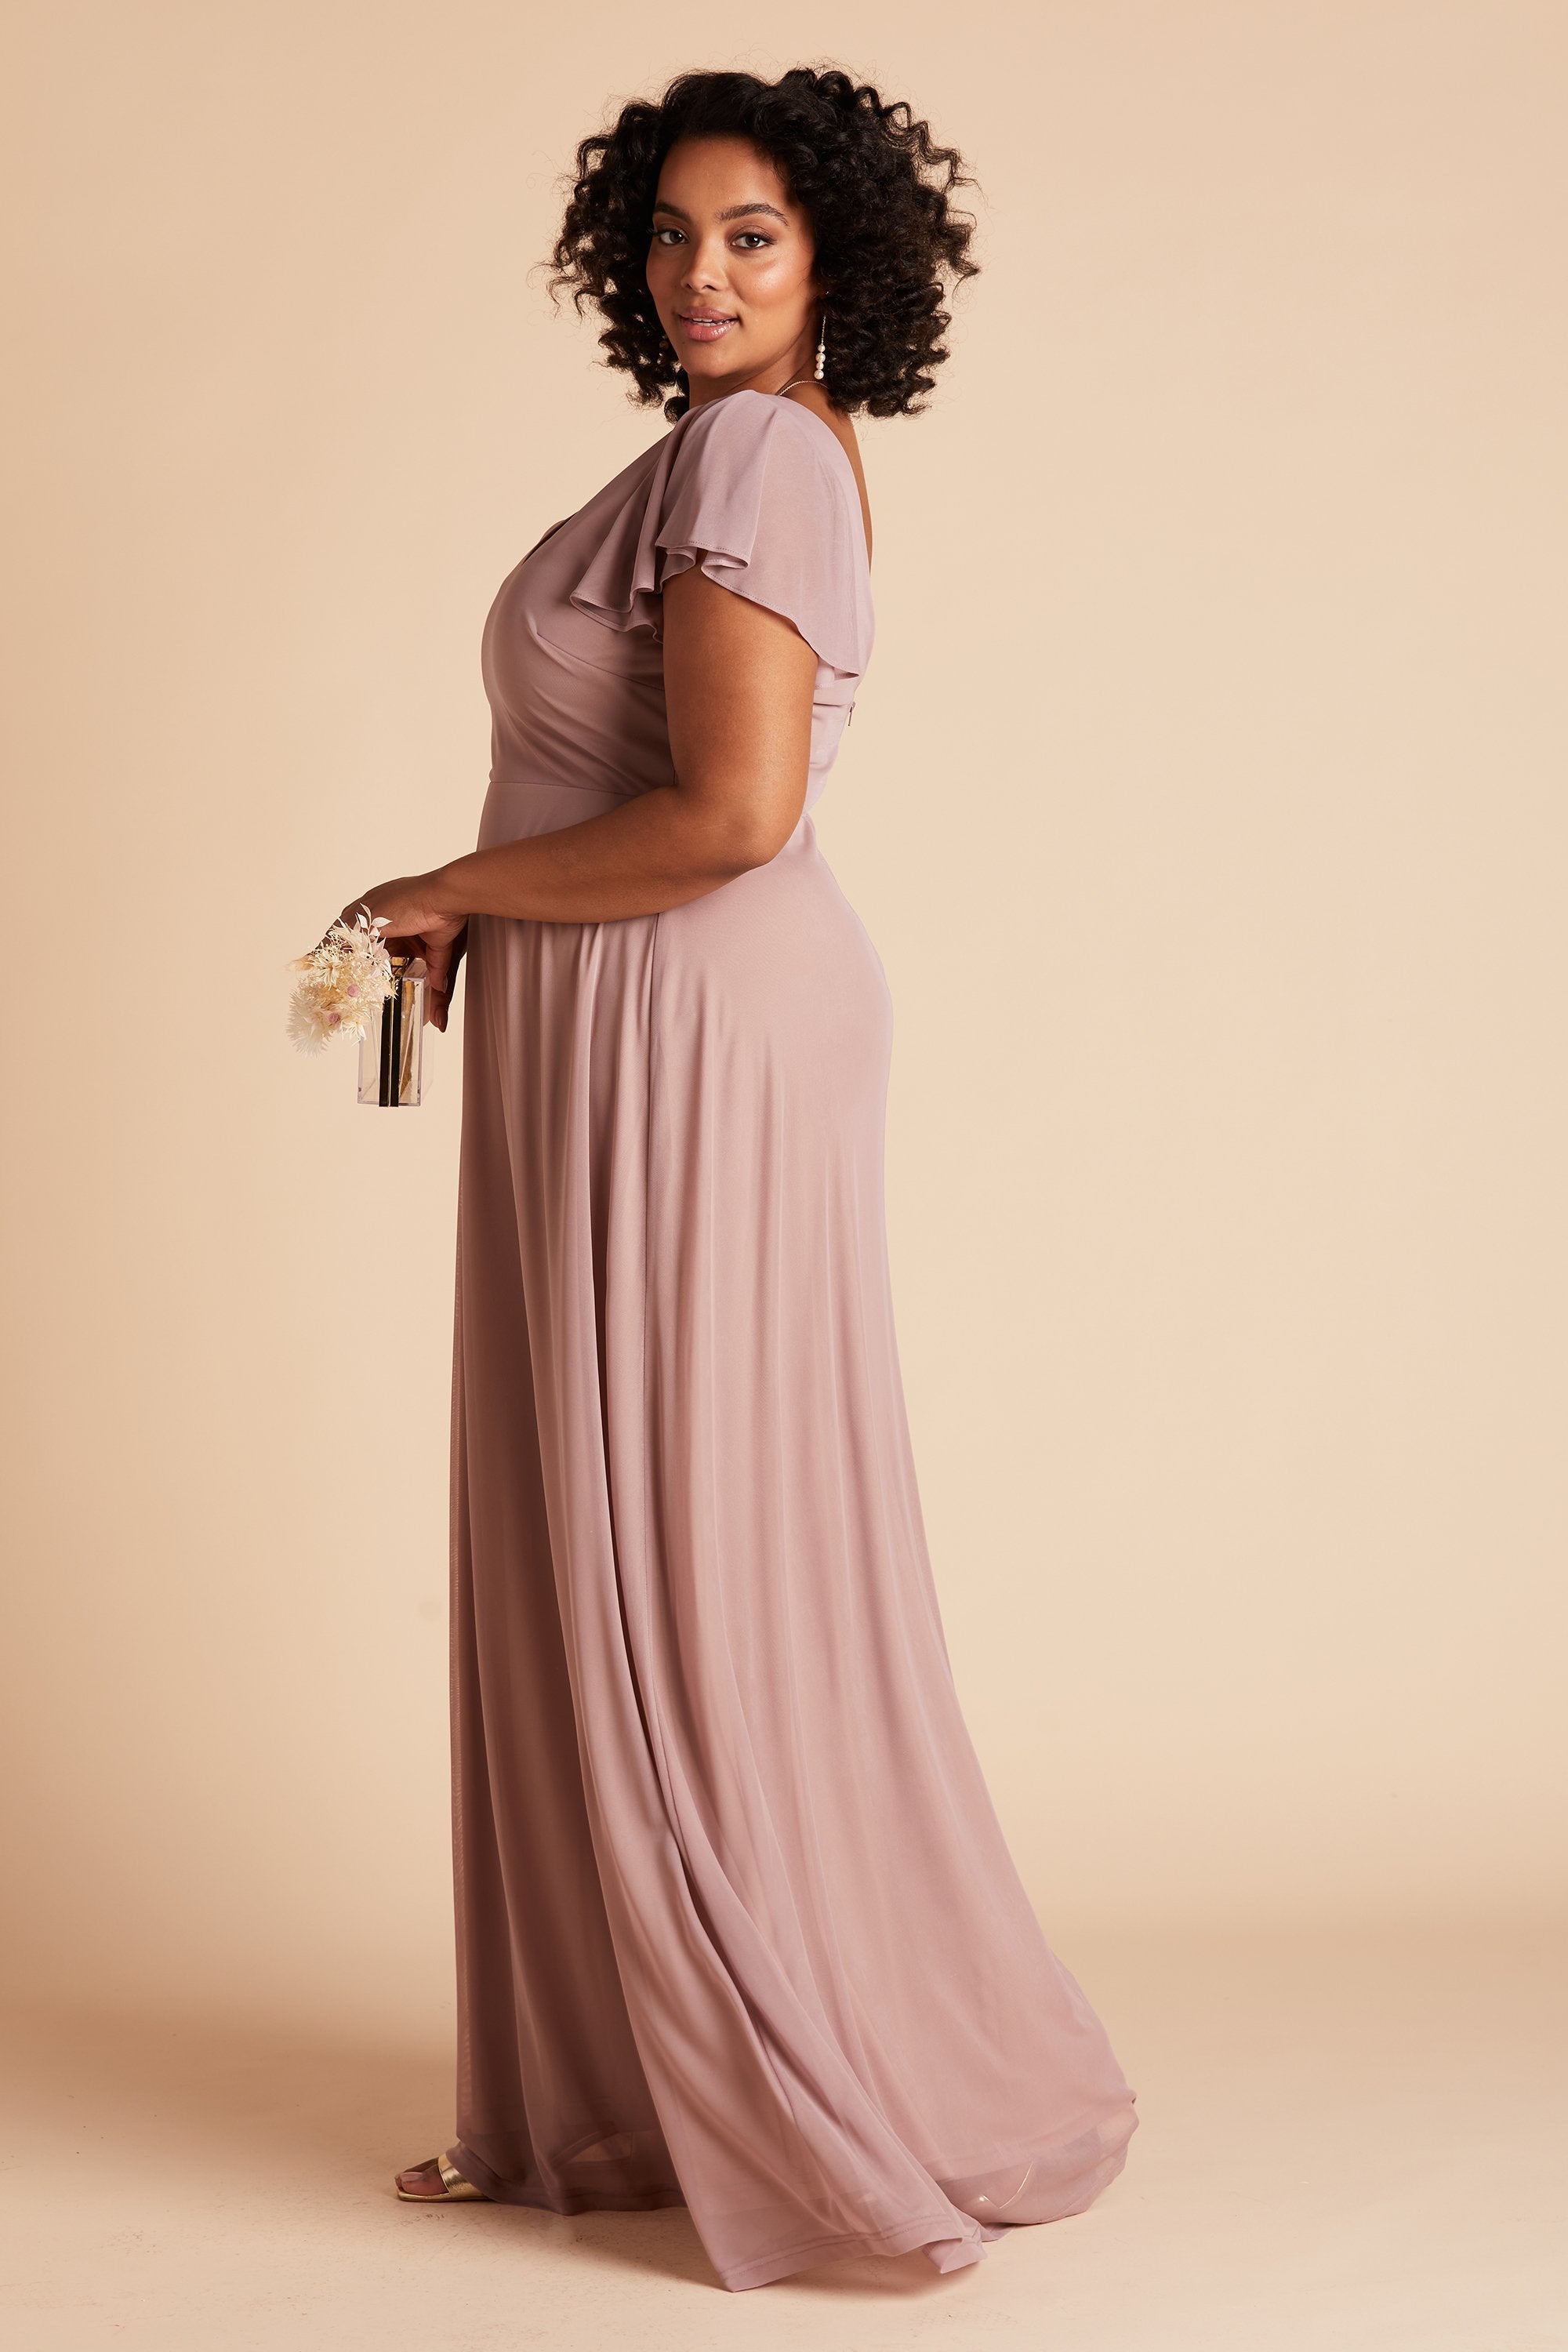 Hannah plus size bridesmaids dress in mauve mesh by Birdy Grey, side view